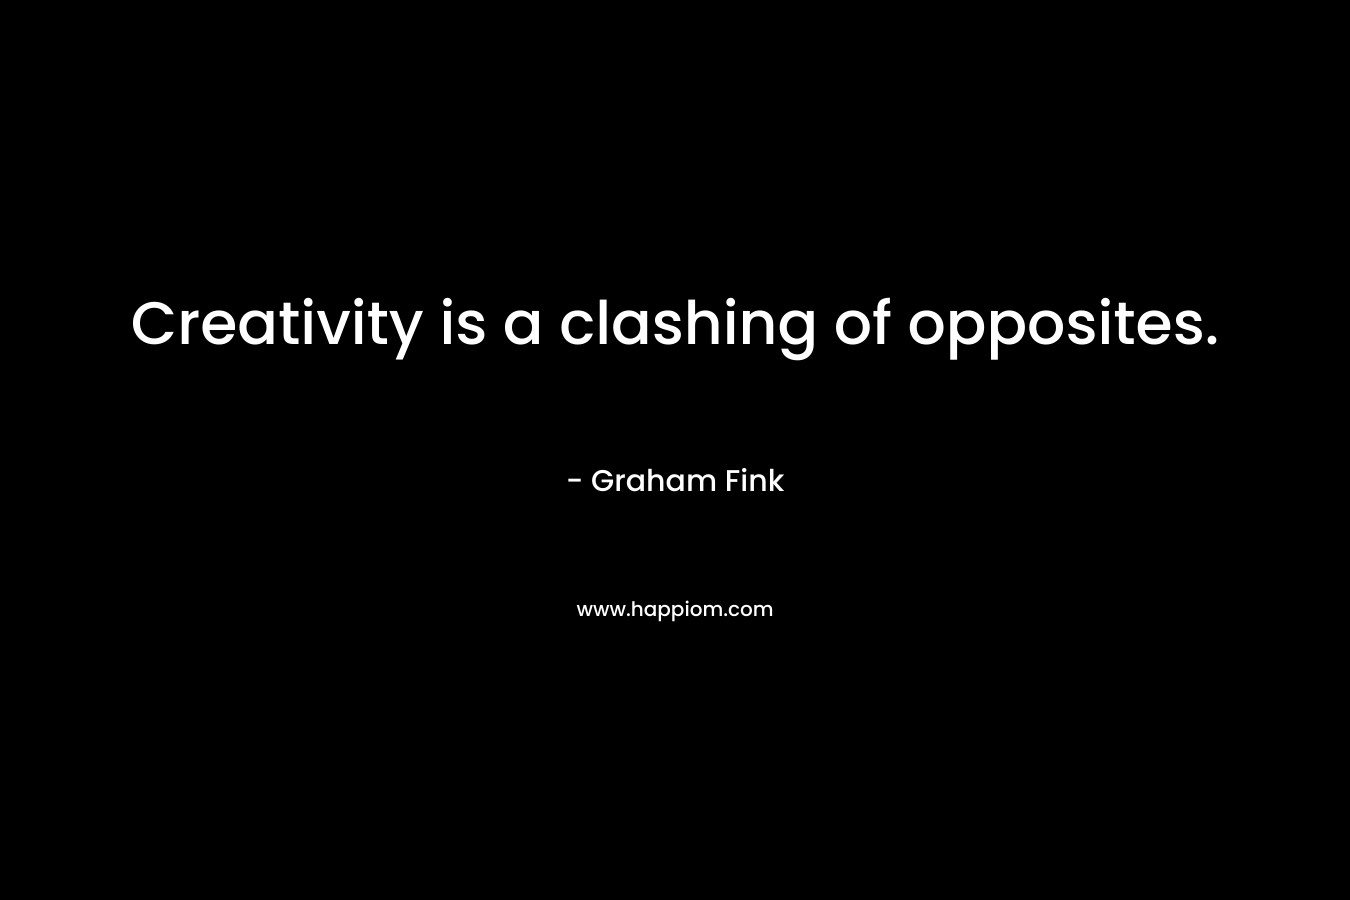 Creativity is a clashing of opposites. – Graham Fink